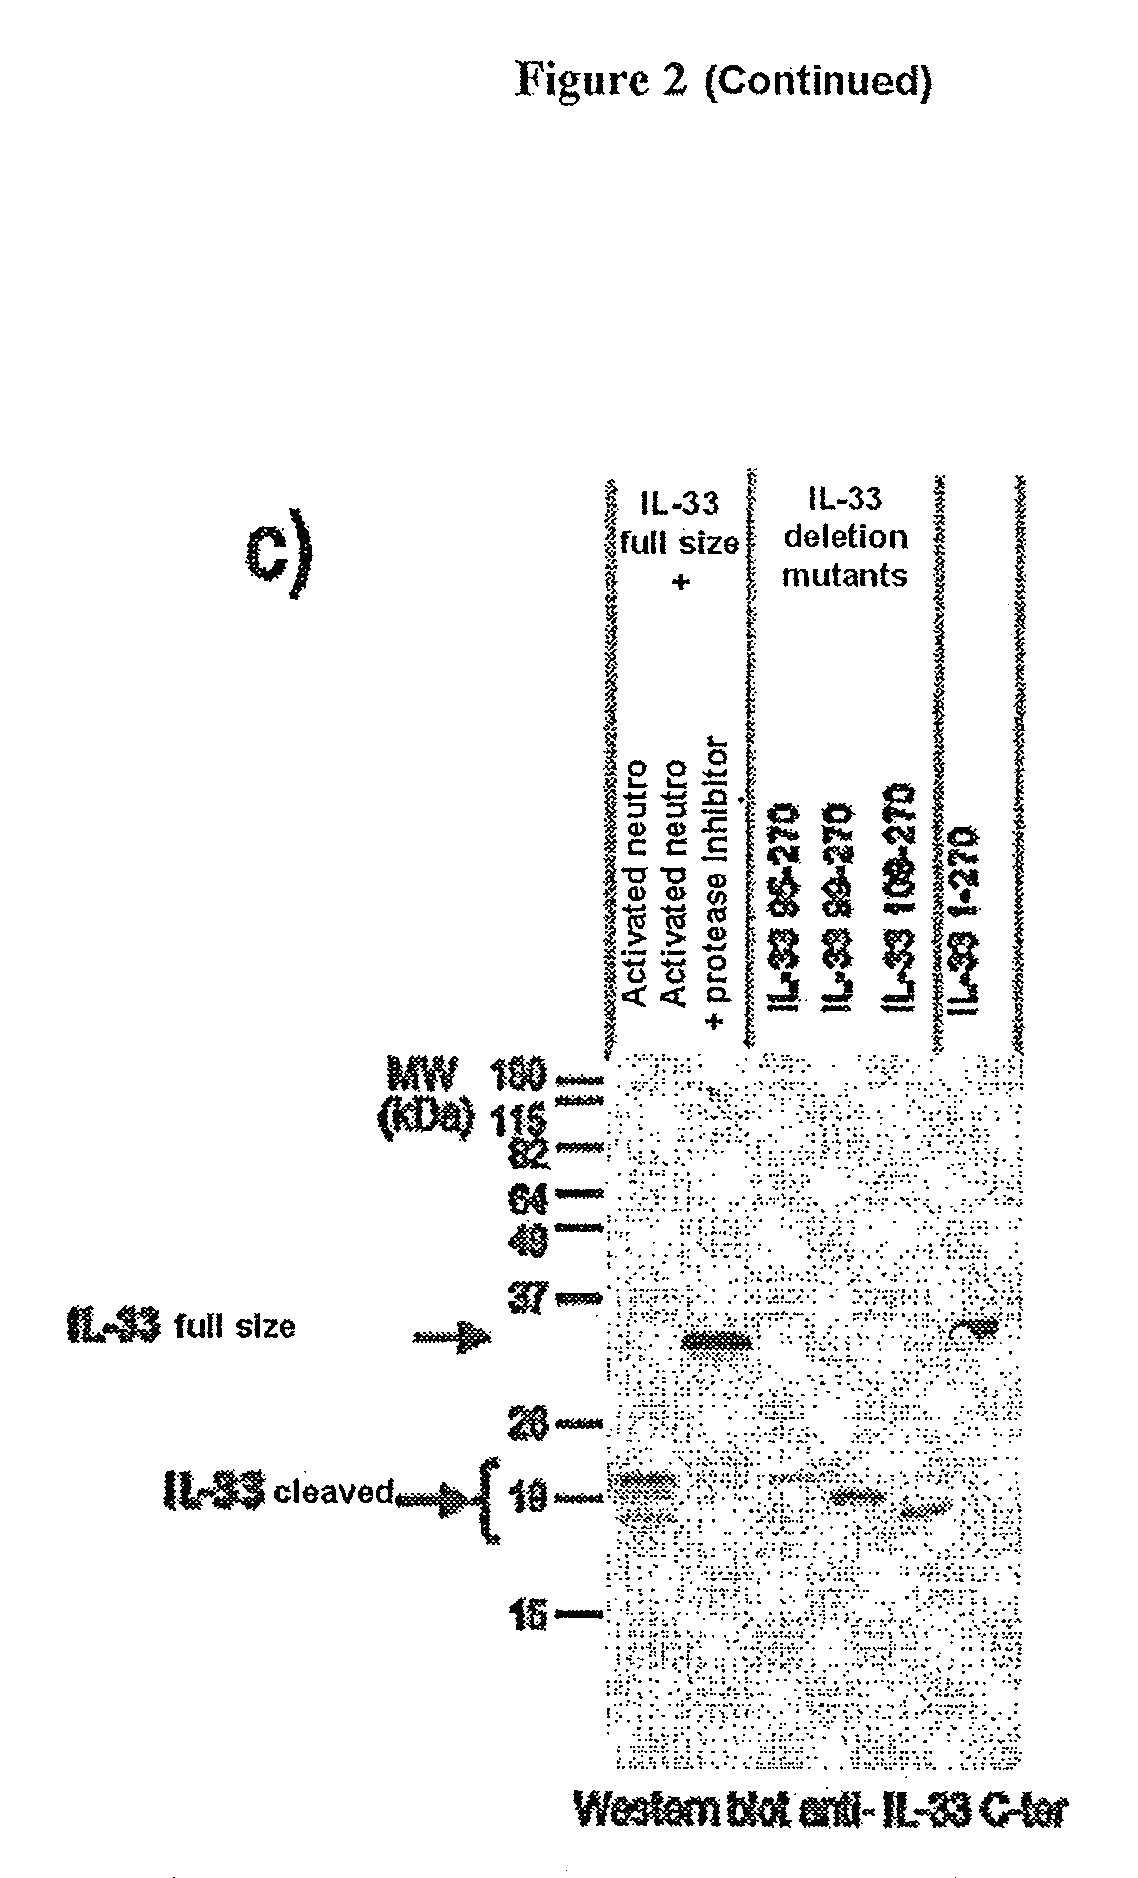 Method for increasing granulocyte number in a patient by administering superactive IL-33 fragments